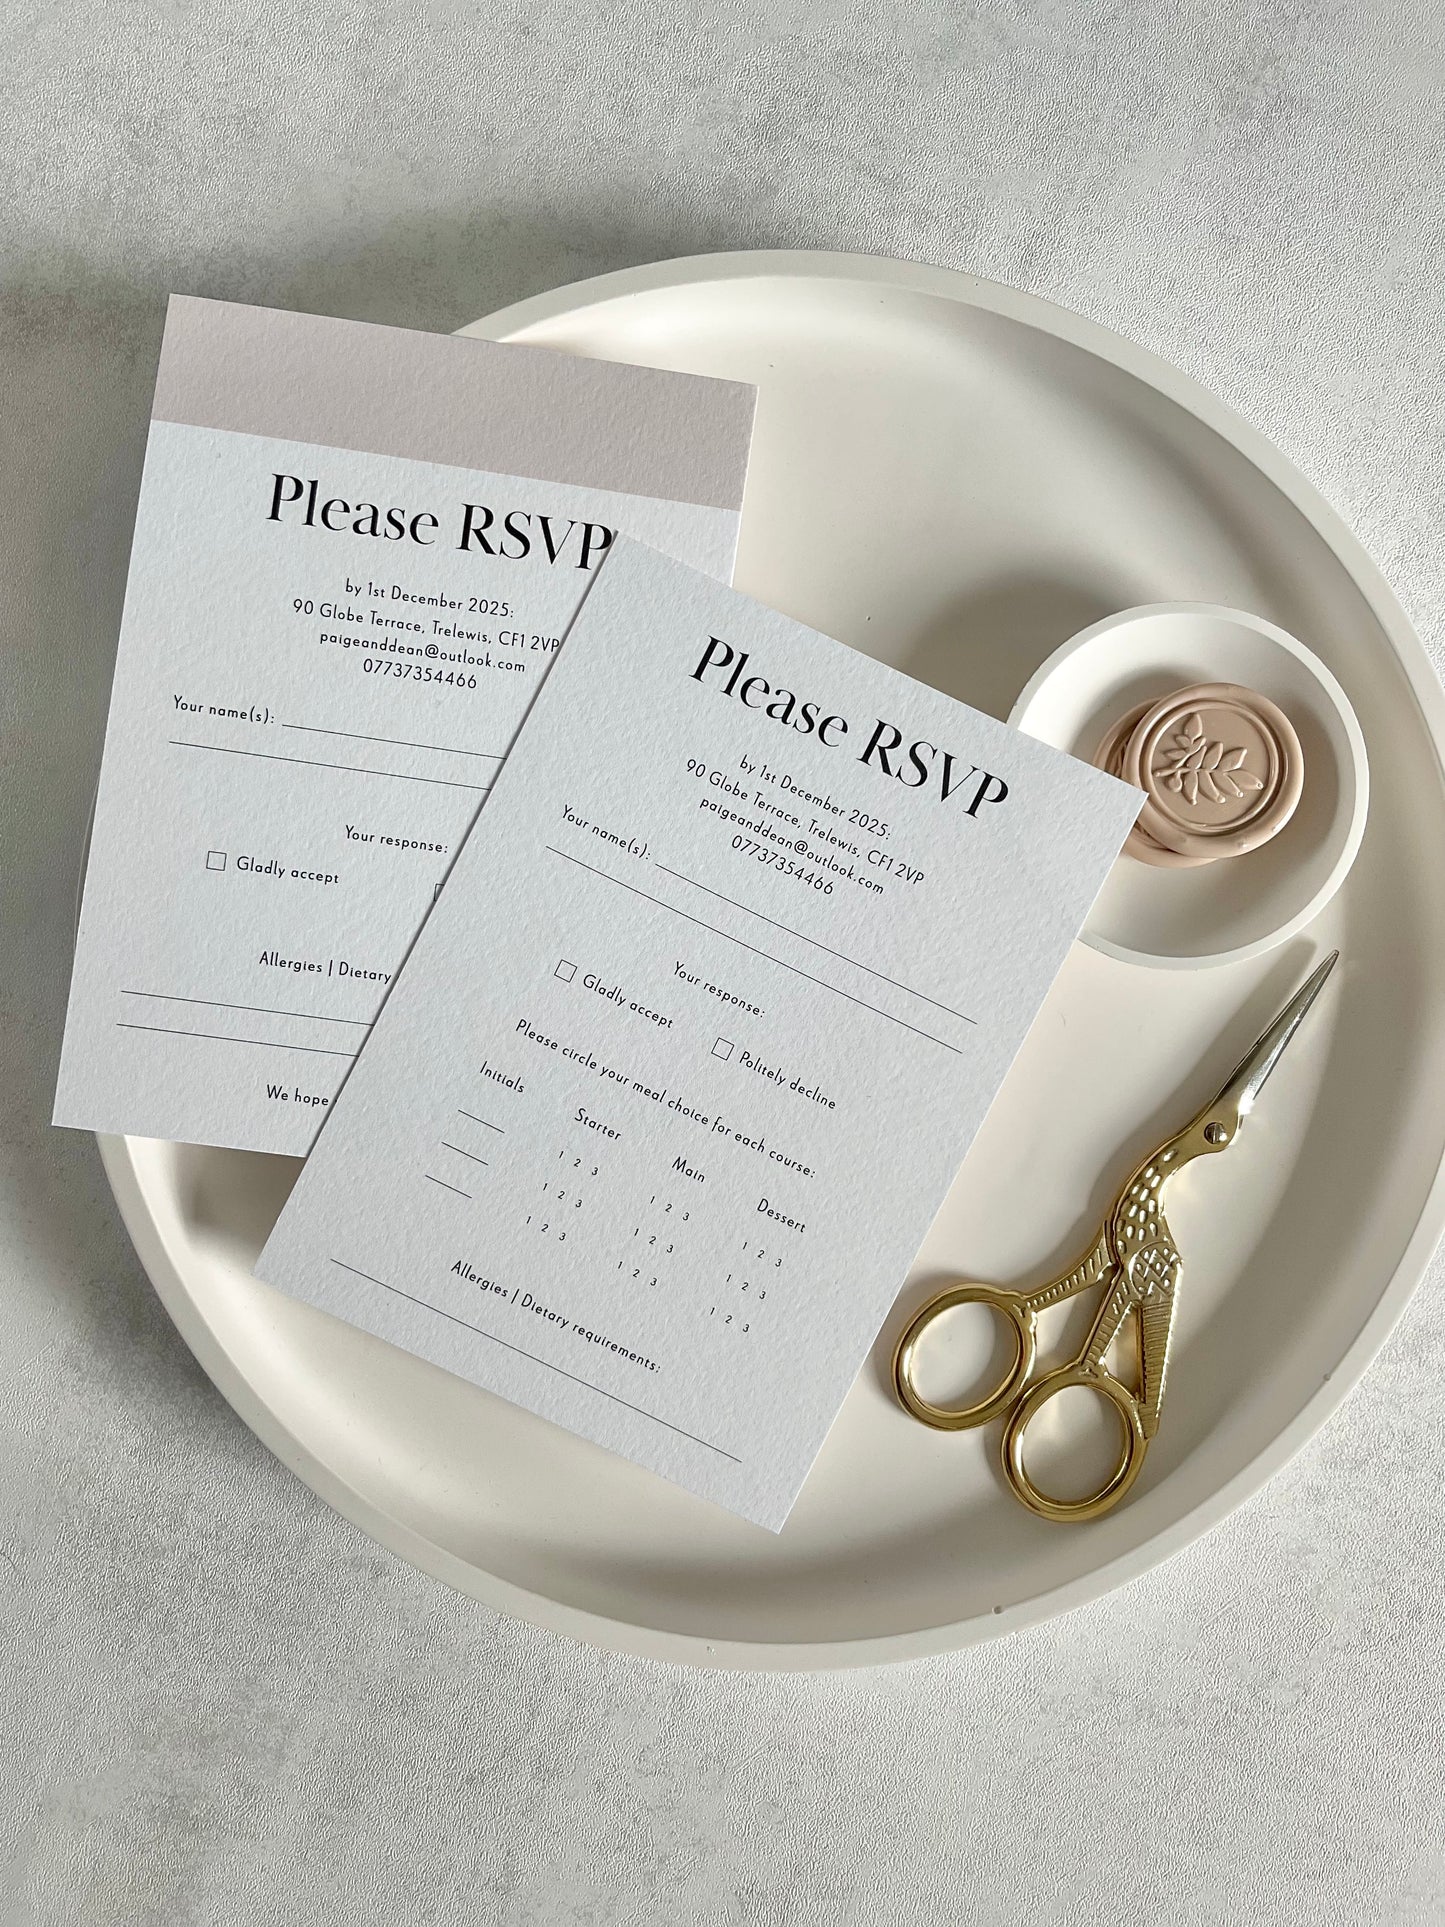 Paige RSVP / Reply Card